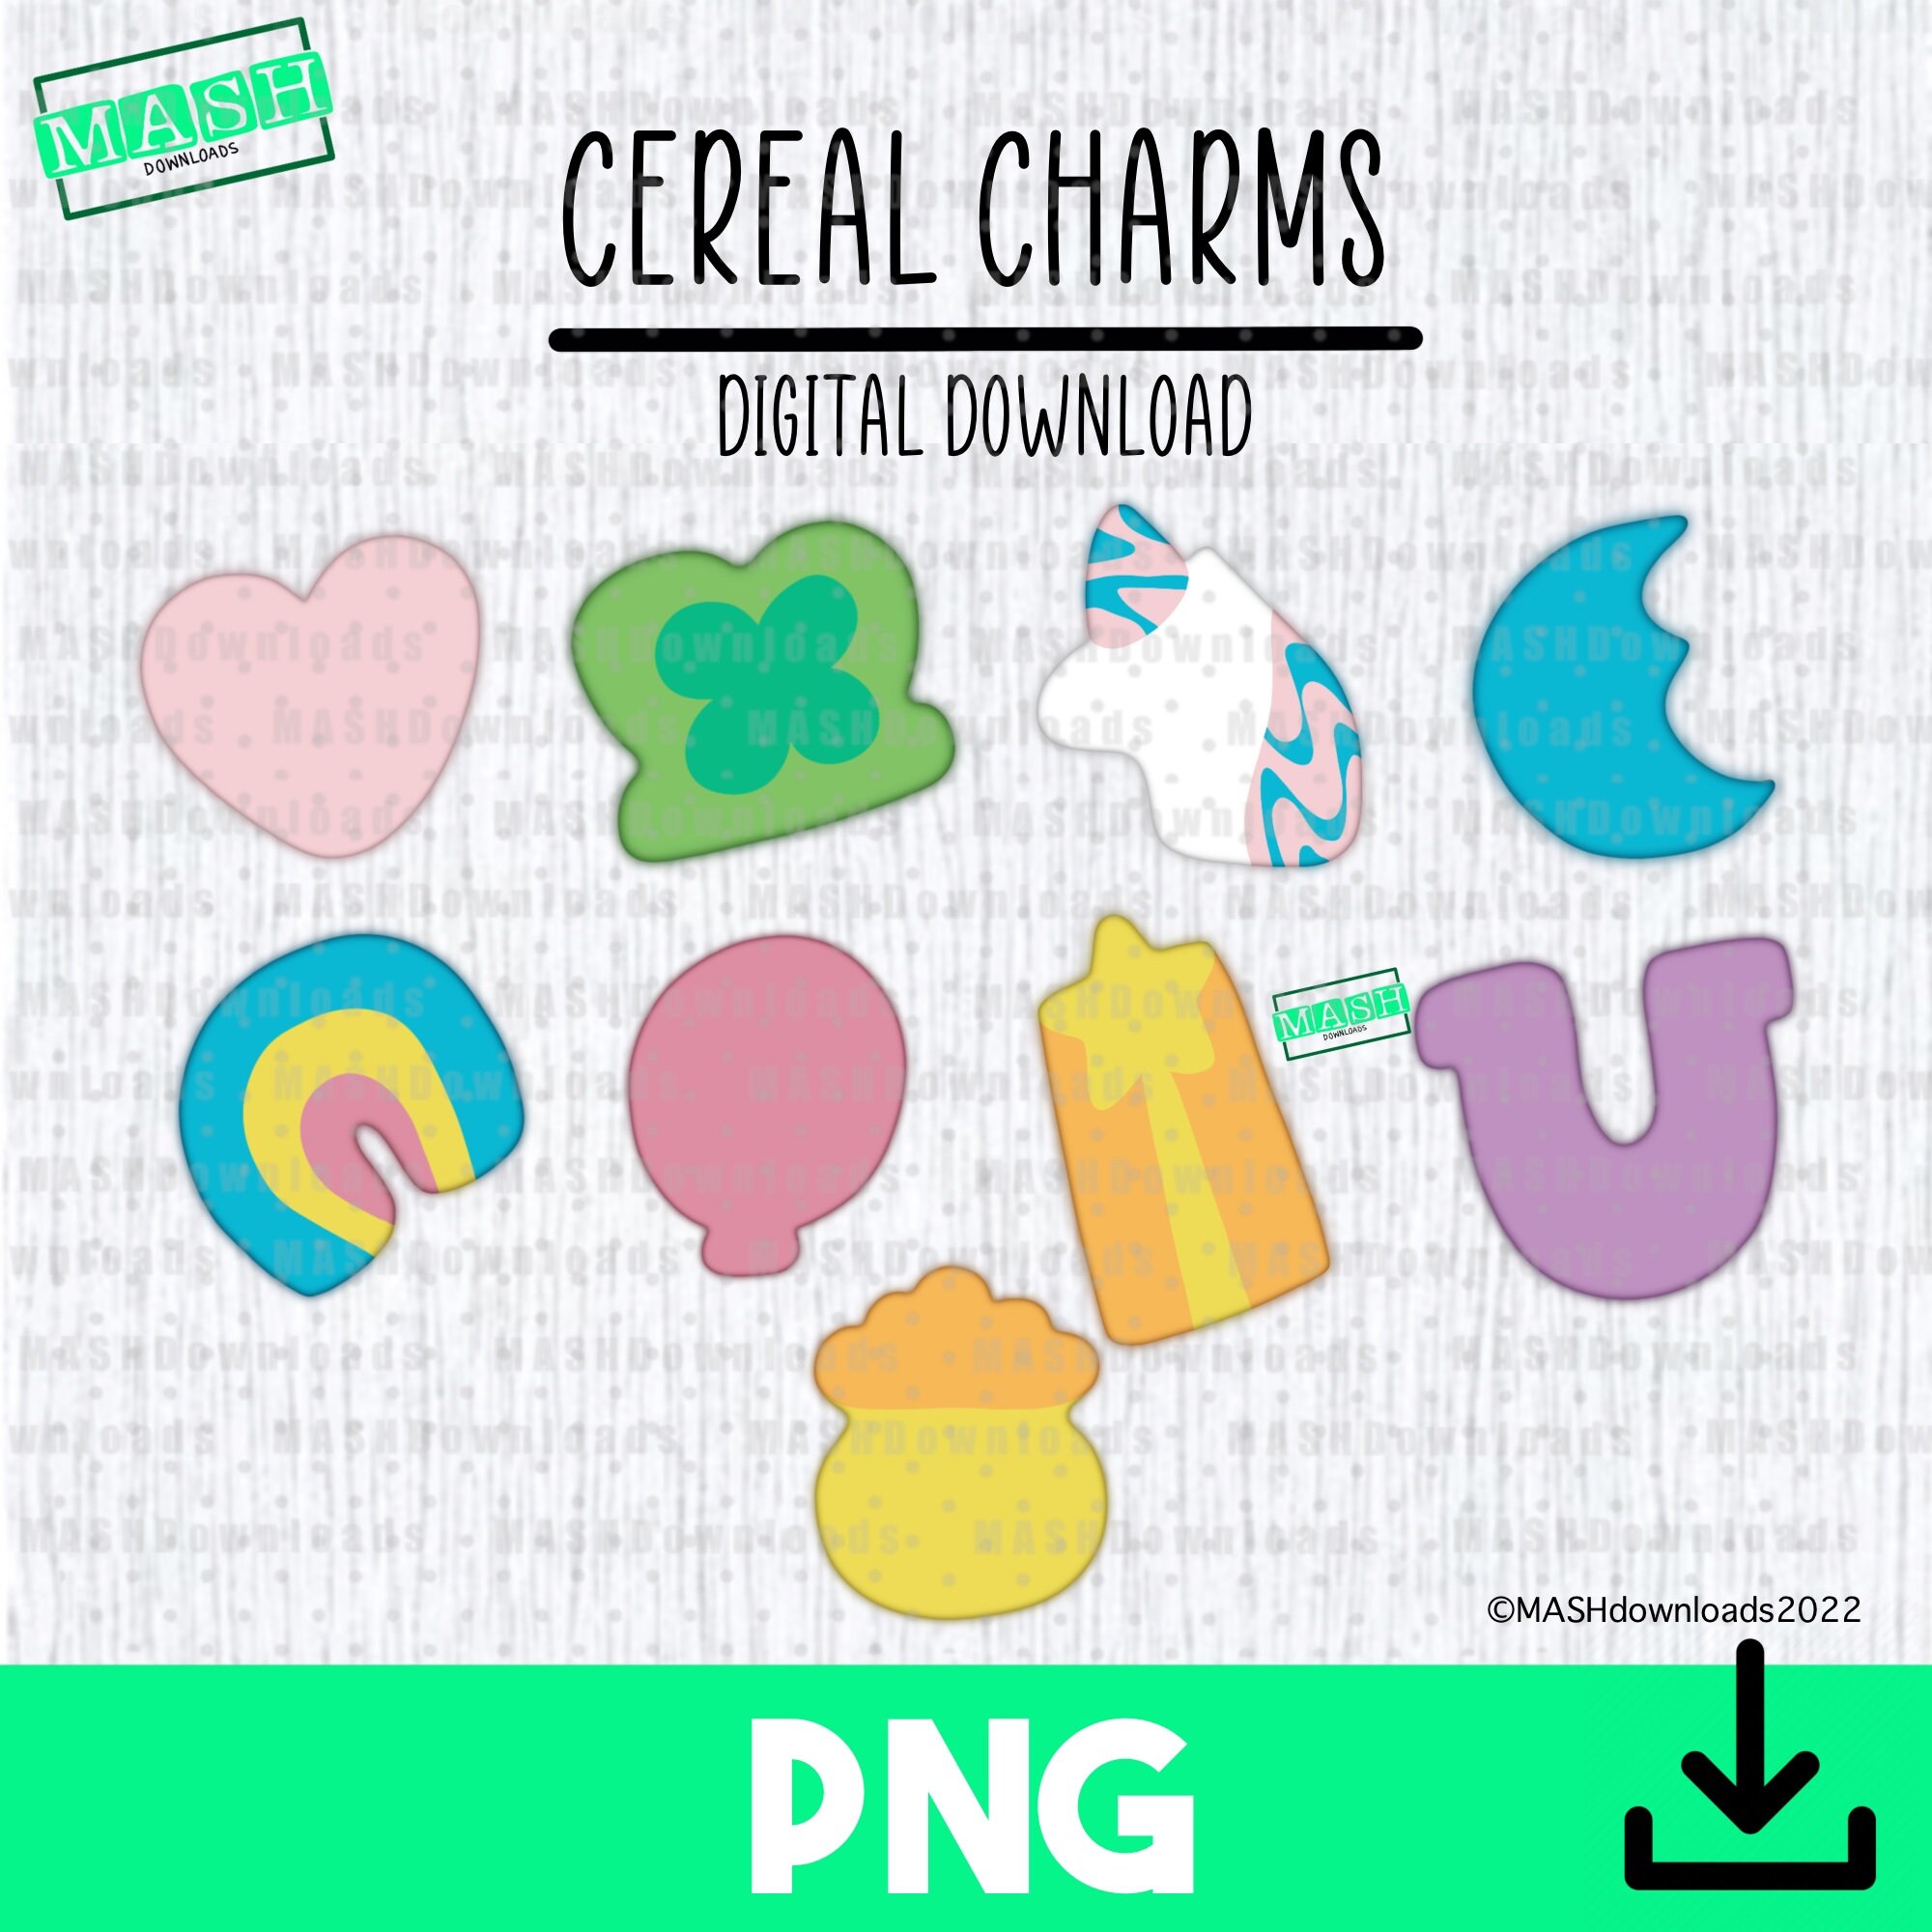 Cereal charms png lucky marshmallow clipart st patricks day images d digital download